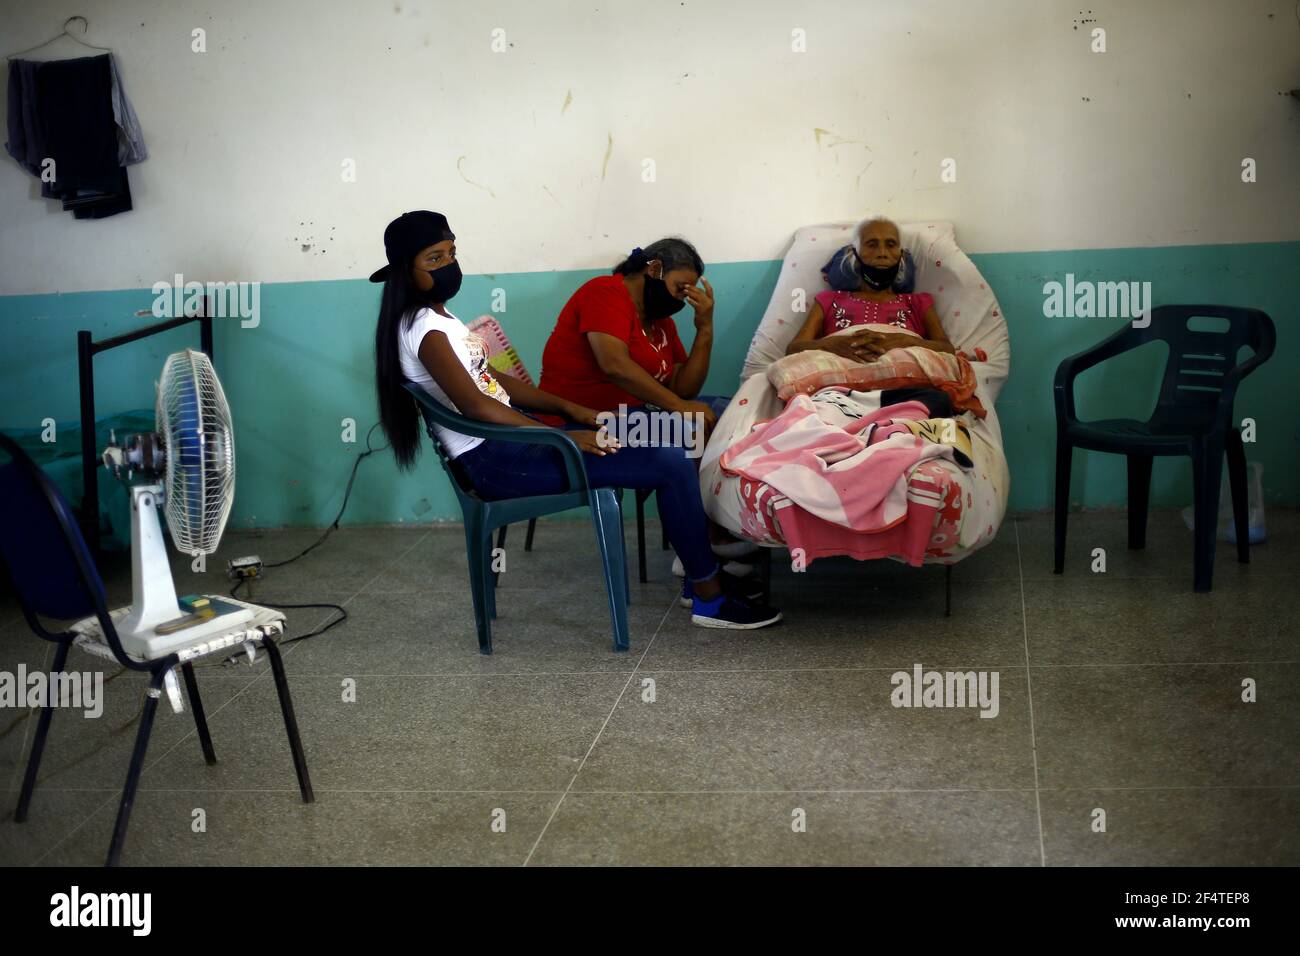 Valencia, Carabobo, Venezuela. 22nd Mar, 2021. March 23, 2021. Andrea Paredes (R), 74 years old, remain in bed awaiting medical attention, with a health situation of reserved prognosis. Photo: Juan Carlos Hernandez Credit: Juan Carlos Hernandez/ZUMA Wire/Alamy Live News Stock Photo